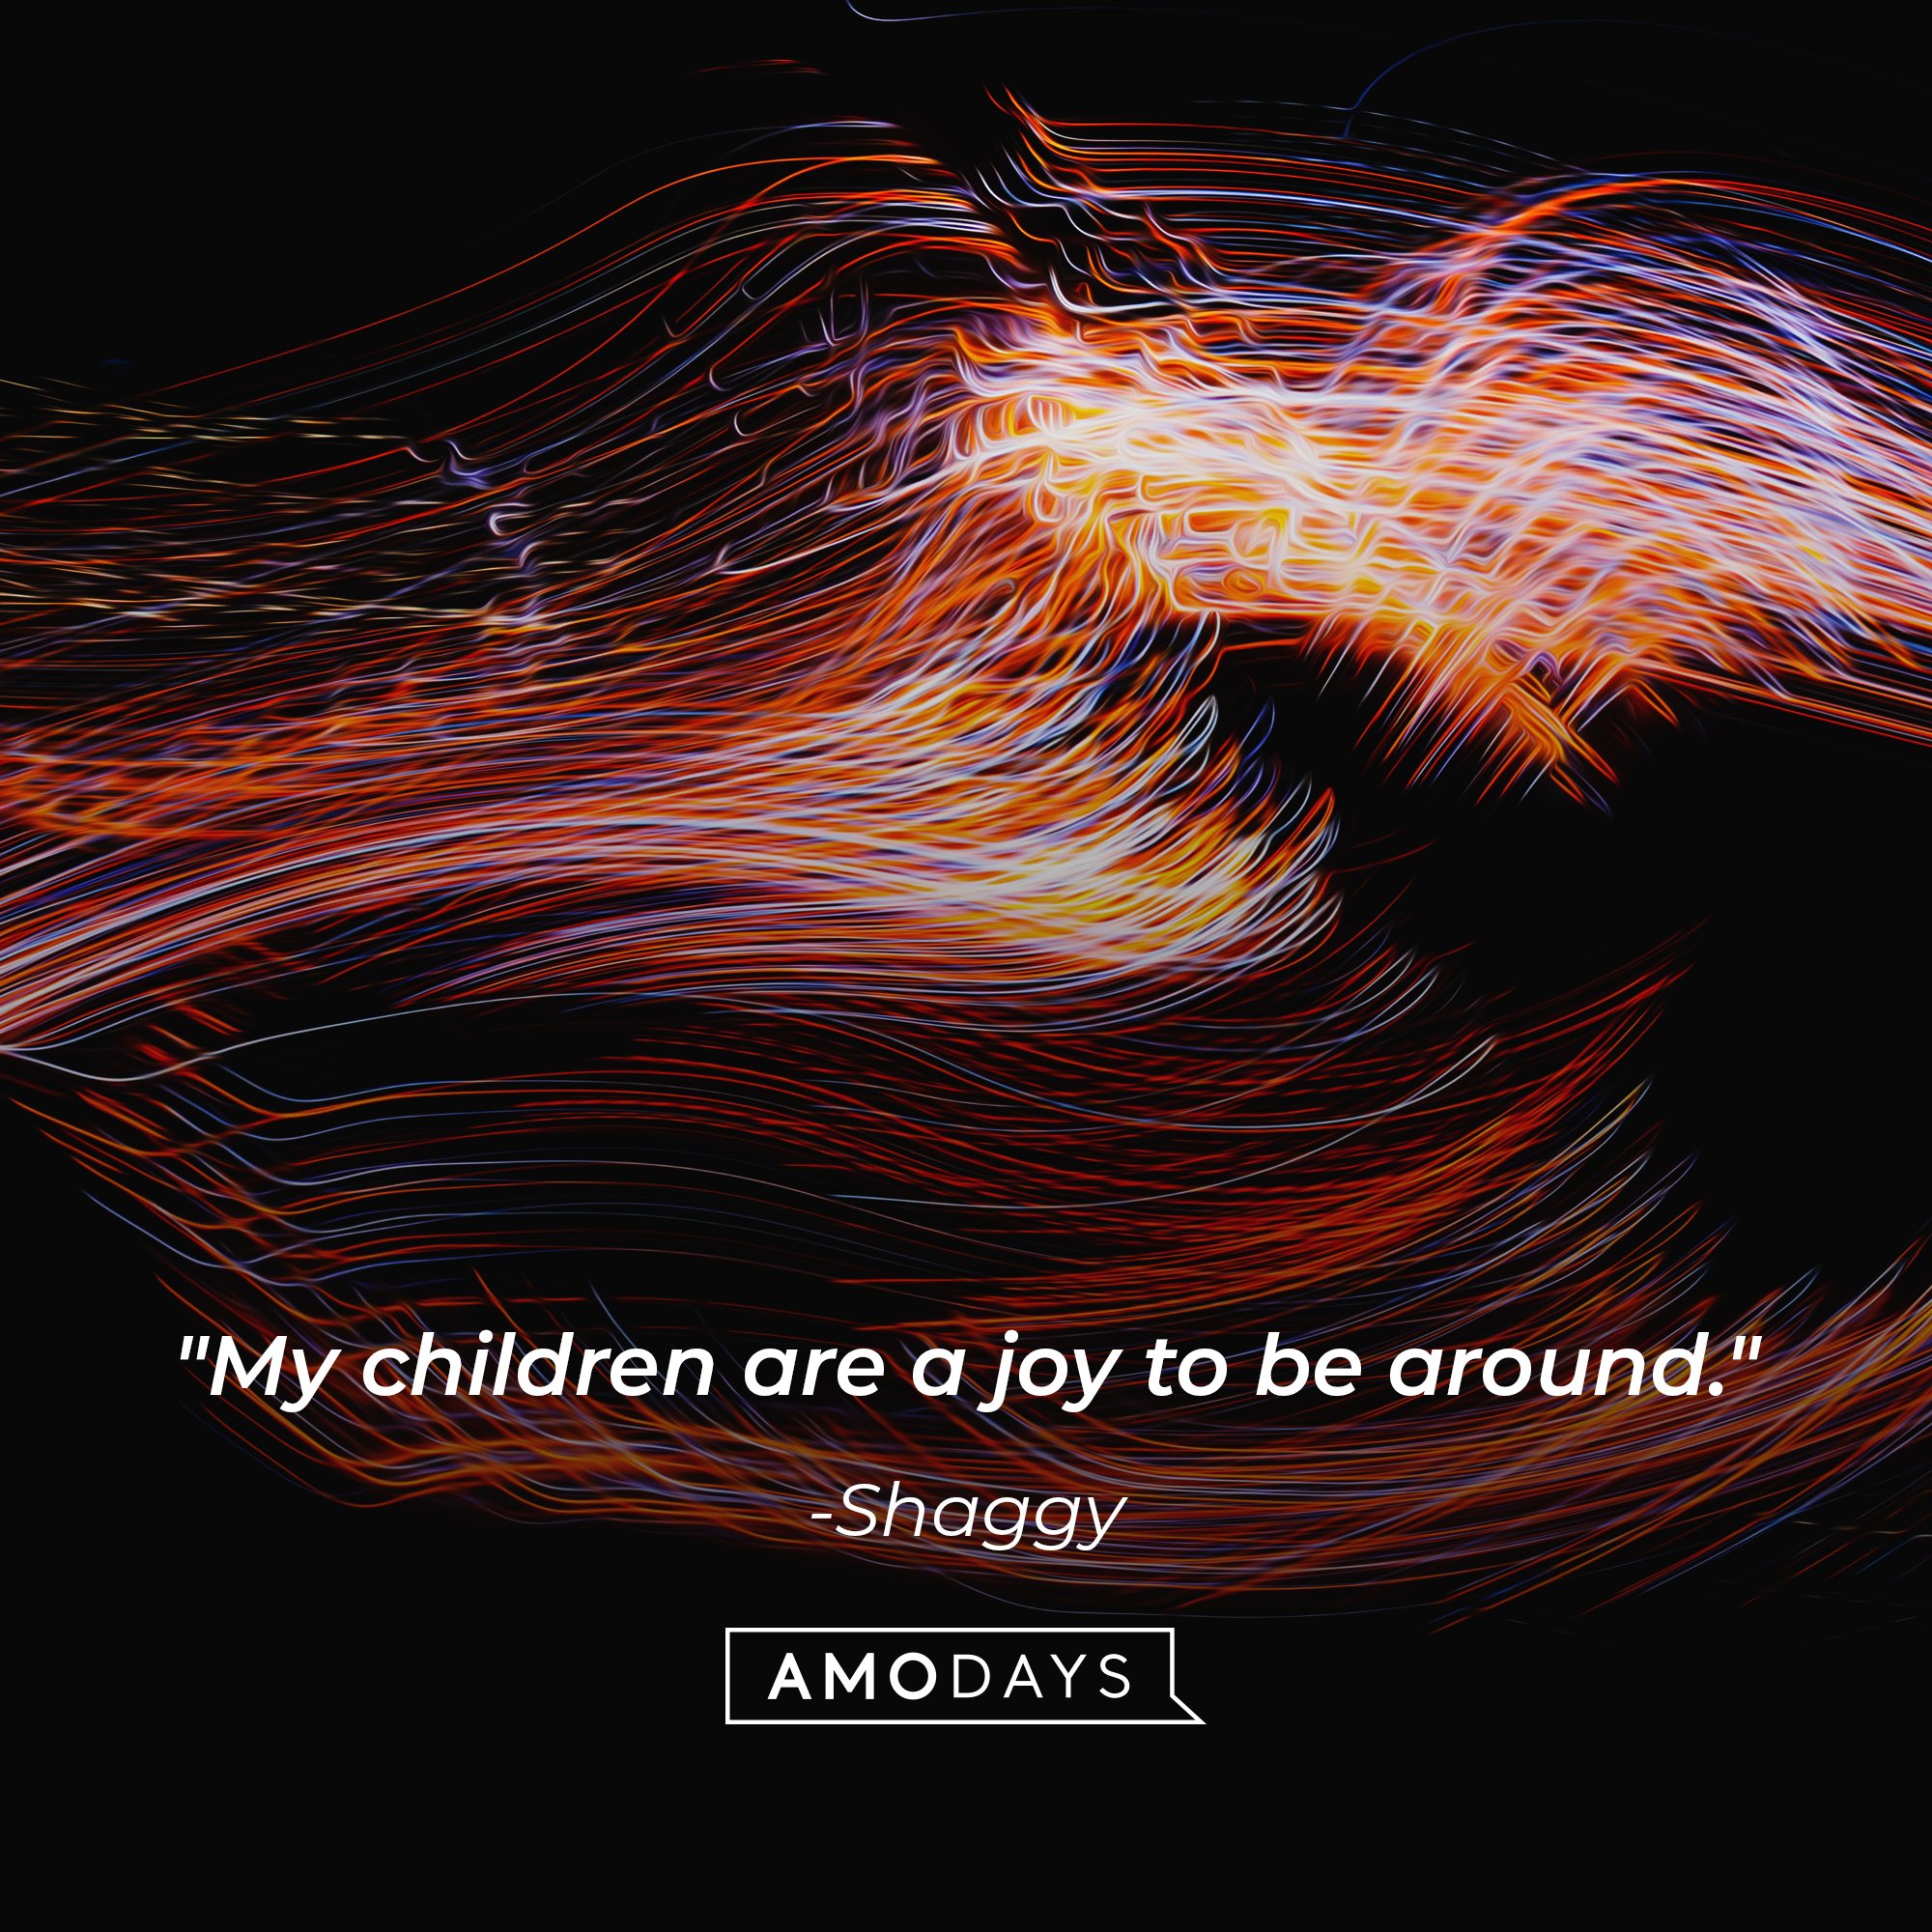 Shaggy's quote: "My children are a joy to be around." | Image: AmoDays